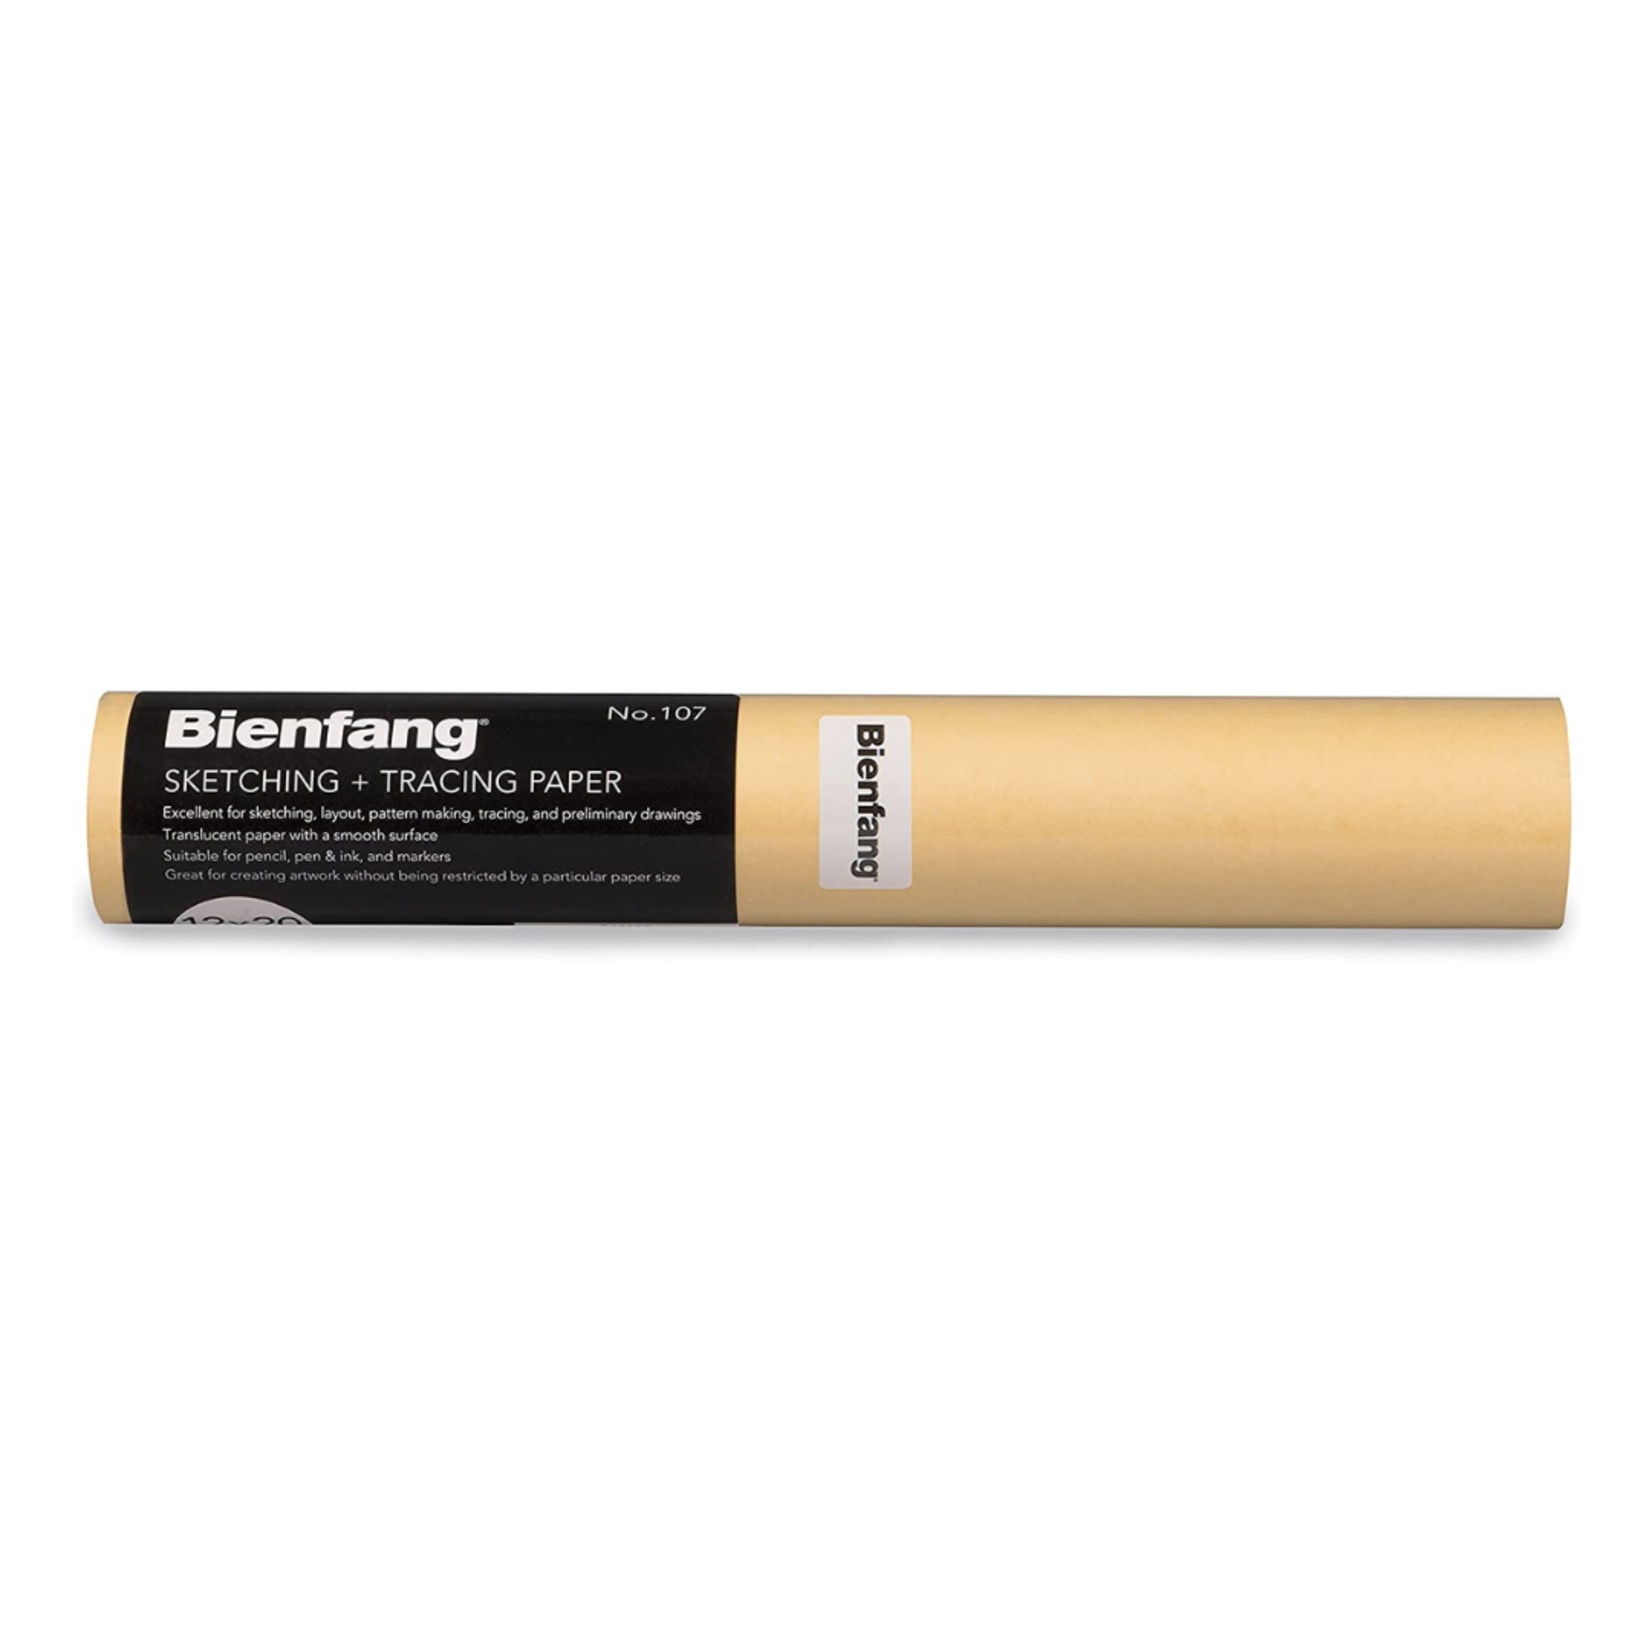 BIENFANG SKETCHING & TRACING PAPER ROLL 12"X50YD CANARY